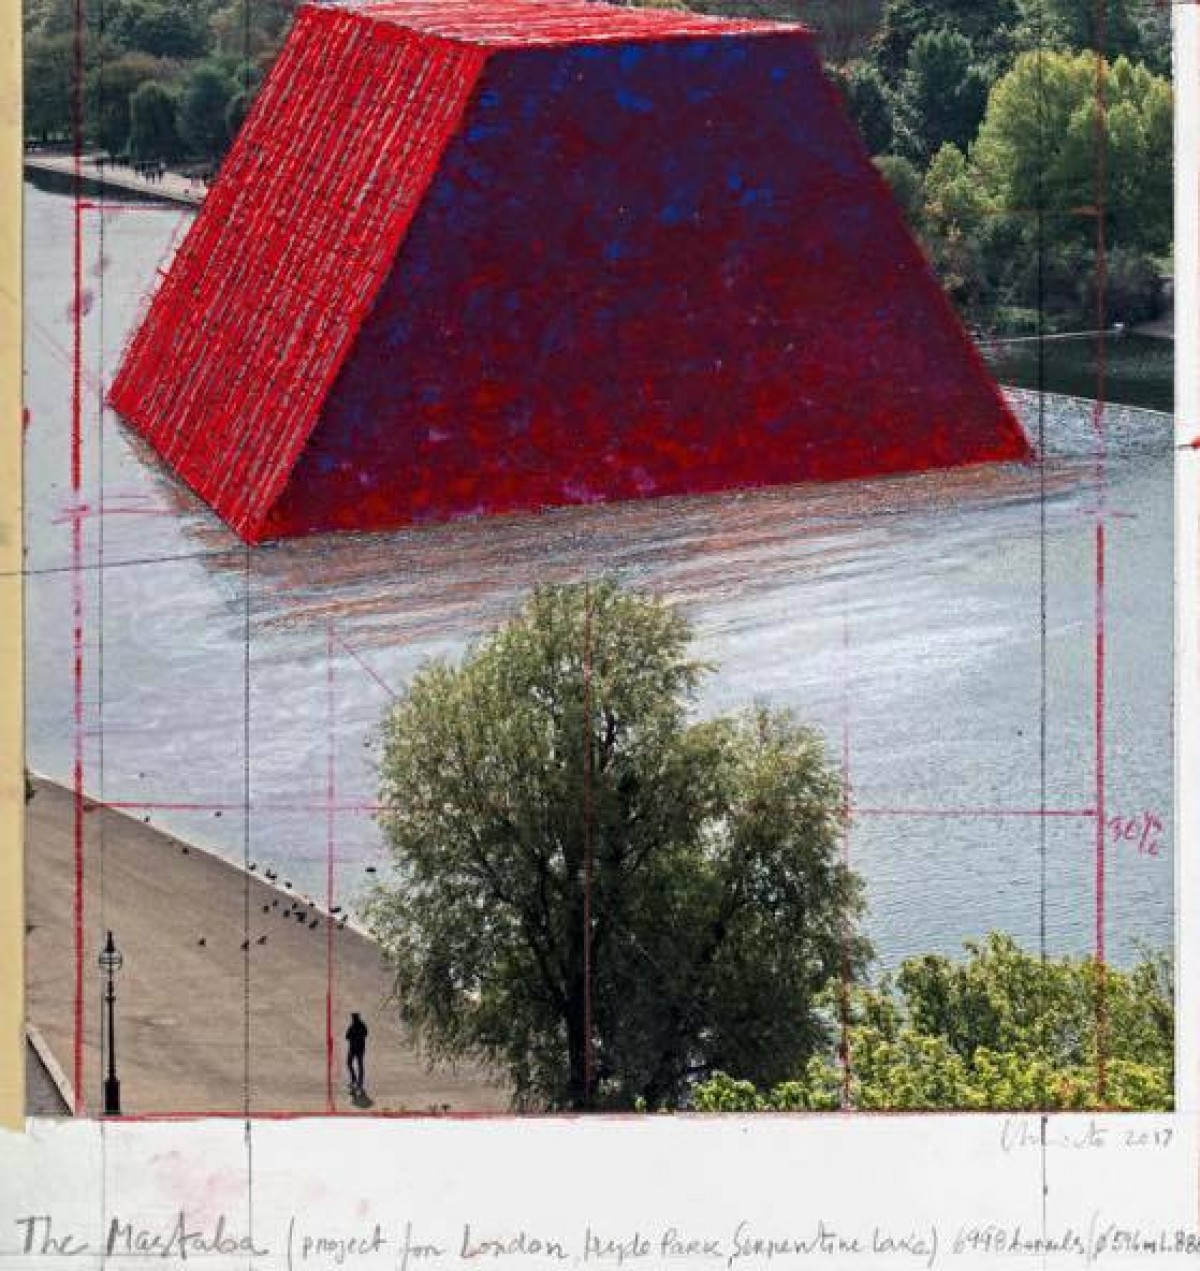 Mastaba - Christo's newest project will be floating in Lake Serpentine  from June 19th - image 4